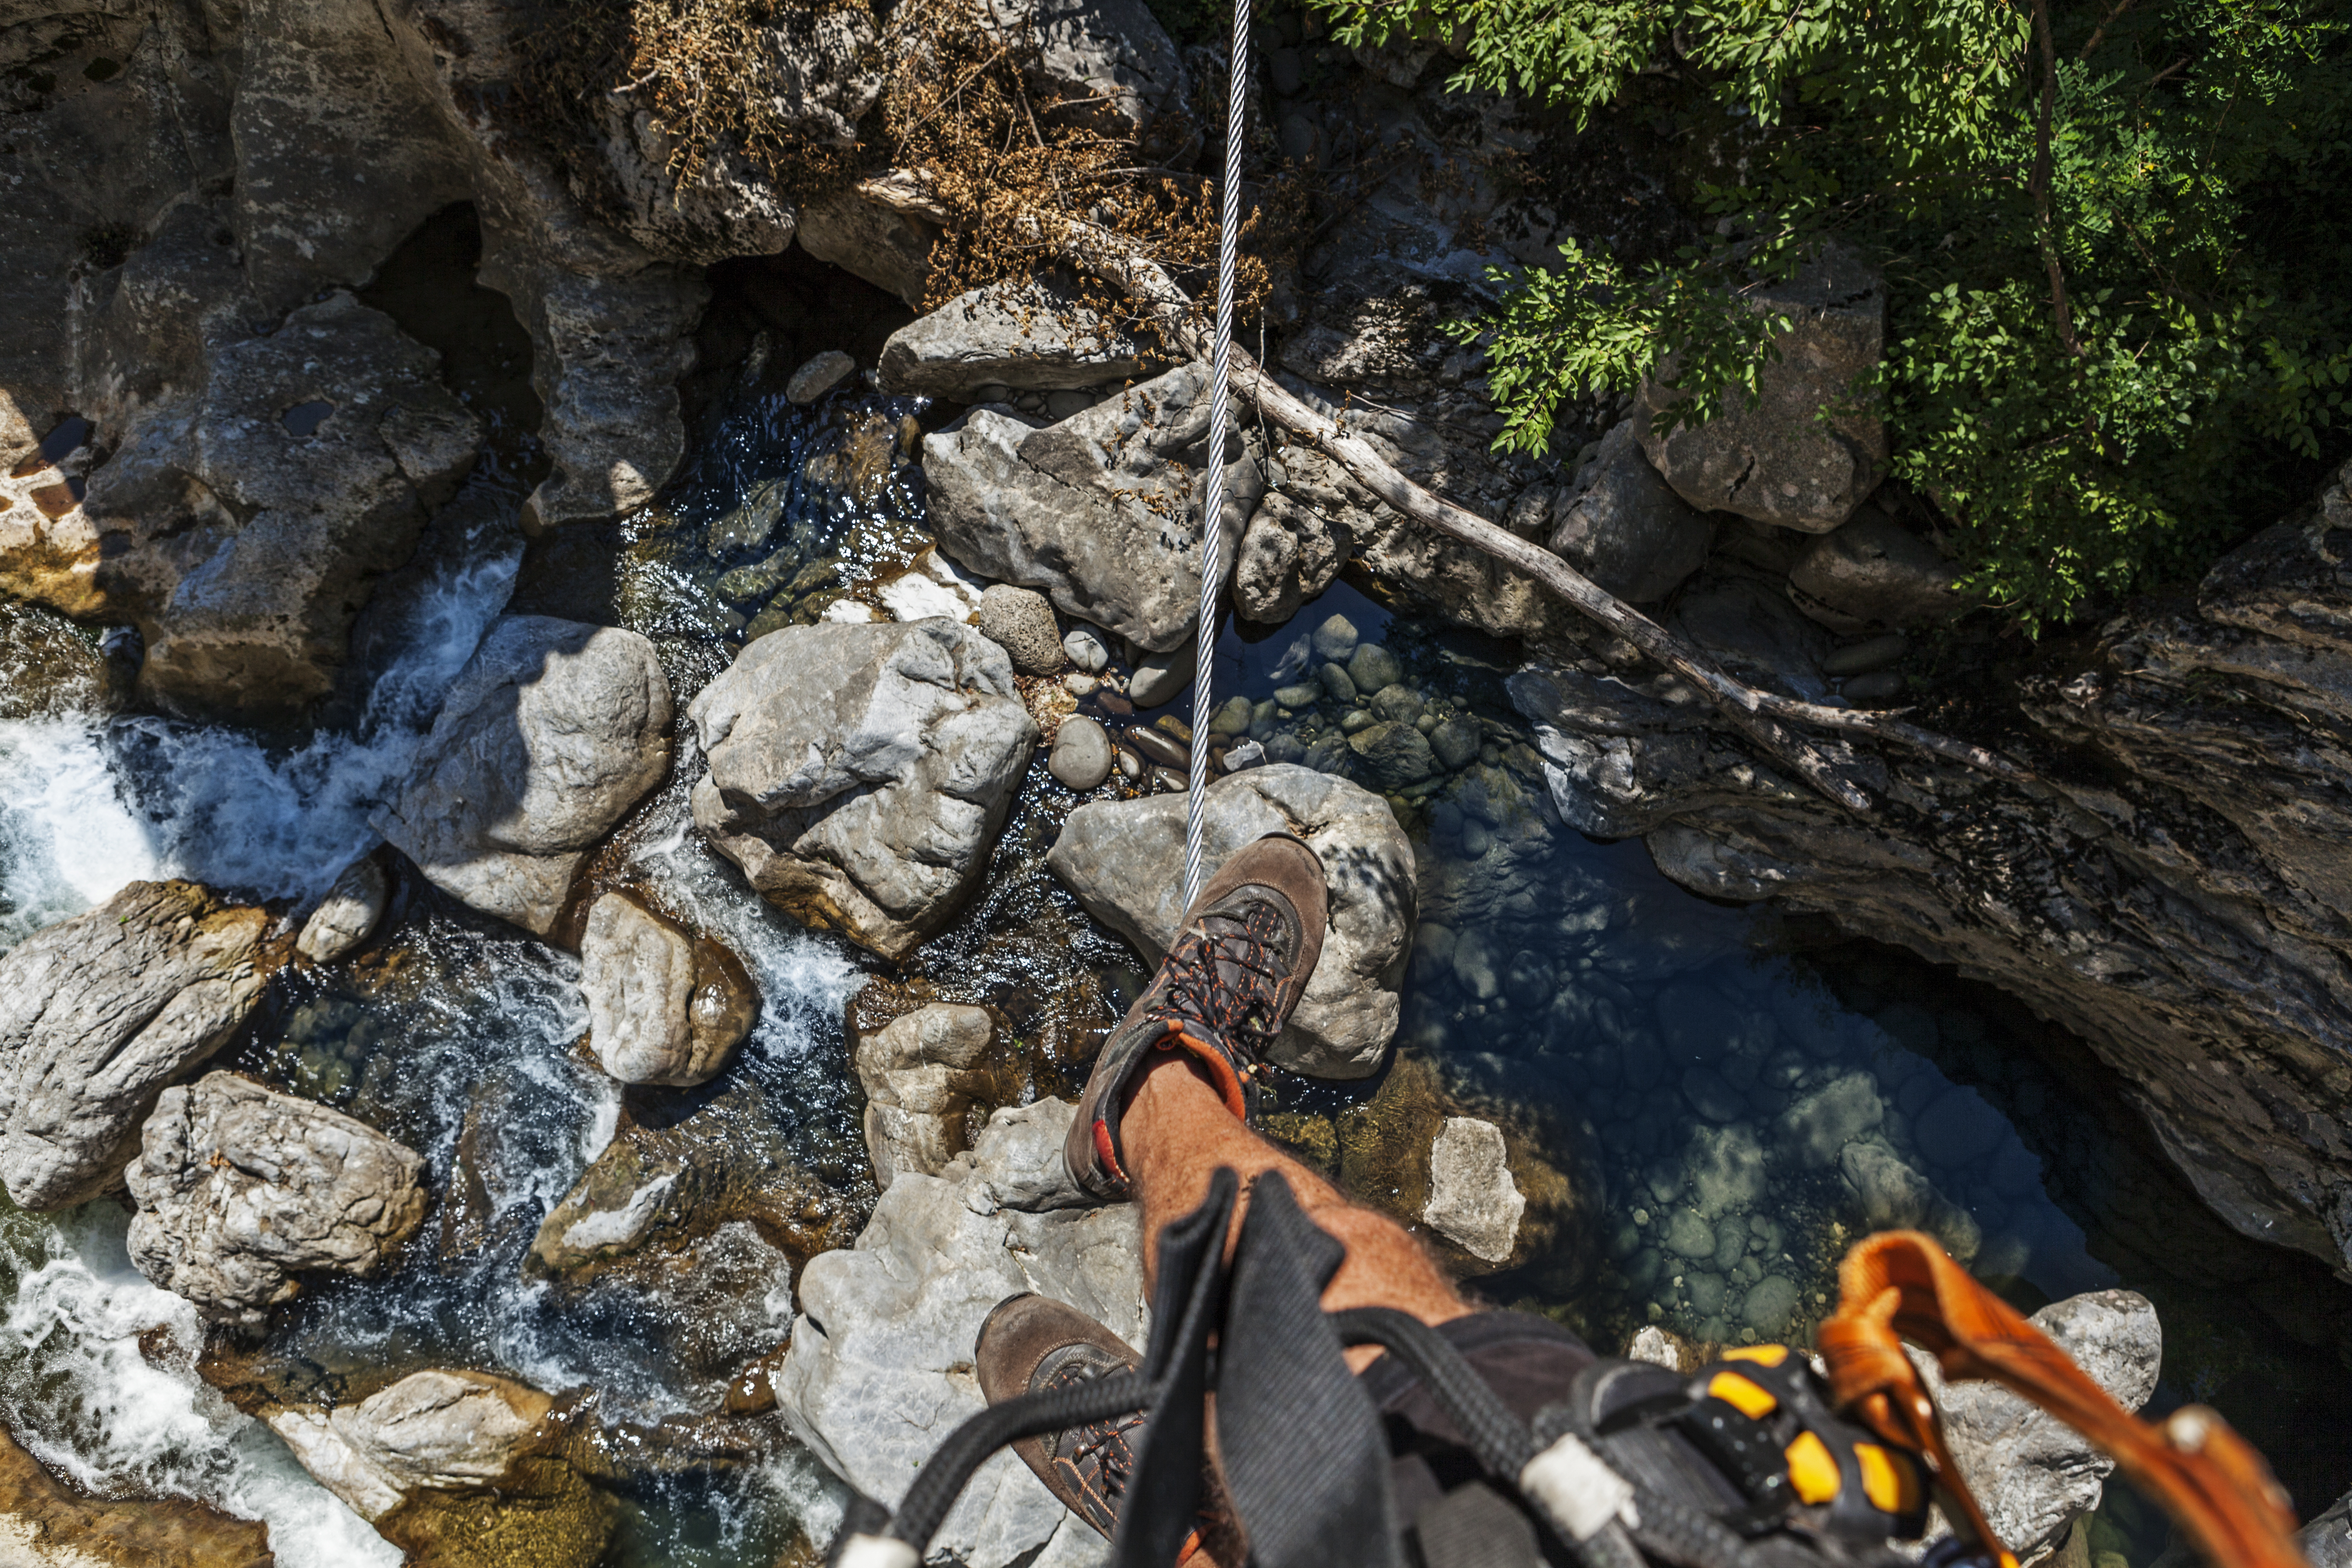 The Canyon Park of Lucca allows you to explore the canyons on a rope with complete safety. This is not the only one. If you like adventure there are also other spots not far from Lerici where it is possible to do canyoning or rafting.